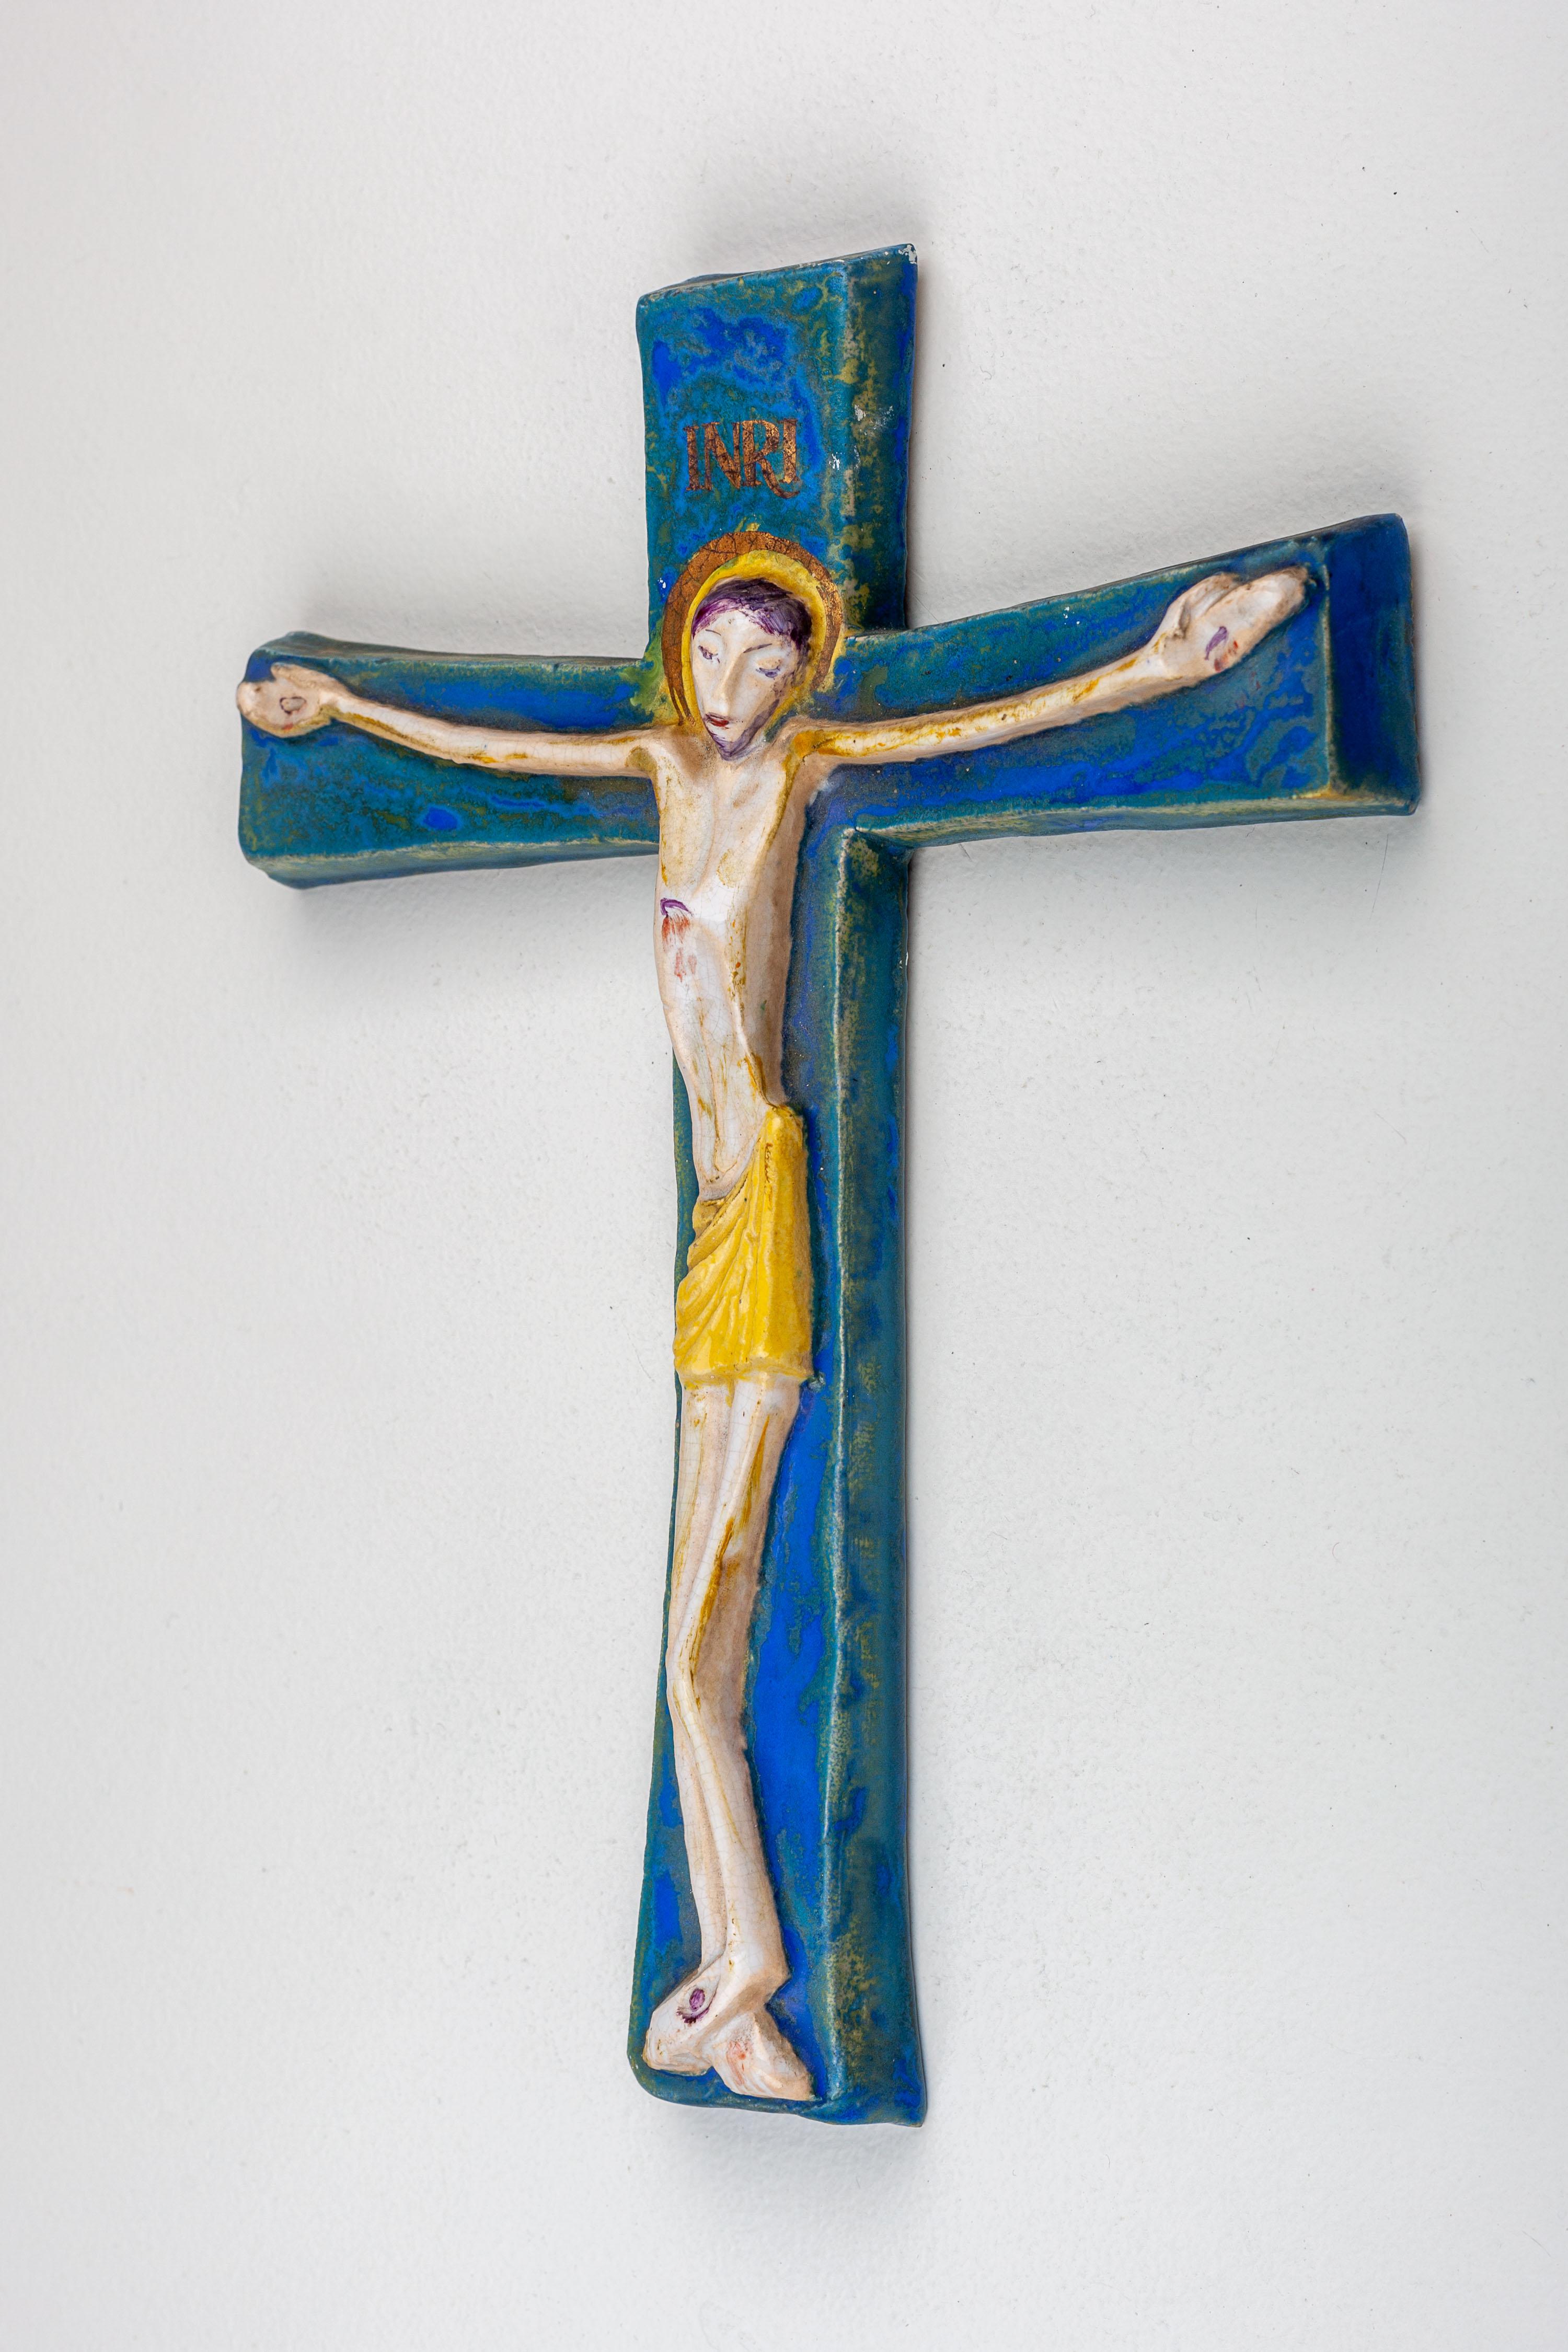 Modernist Cobalt Blue and Gold Wall Cross - European Studio Pottery Masterpiece For Sale 9